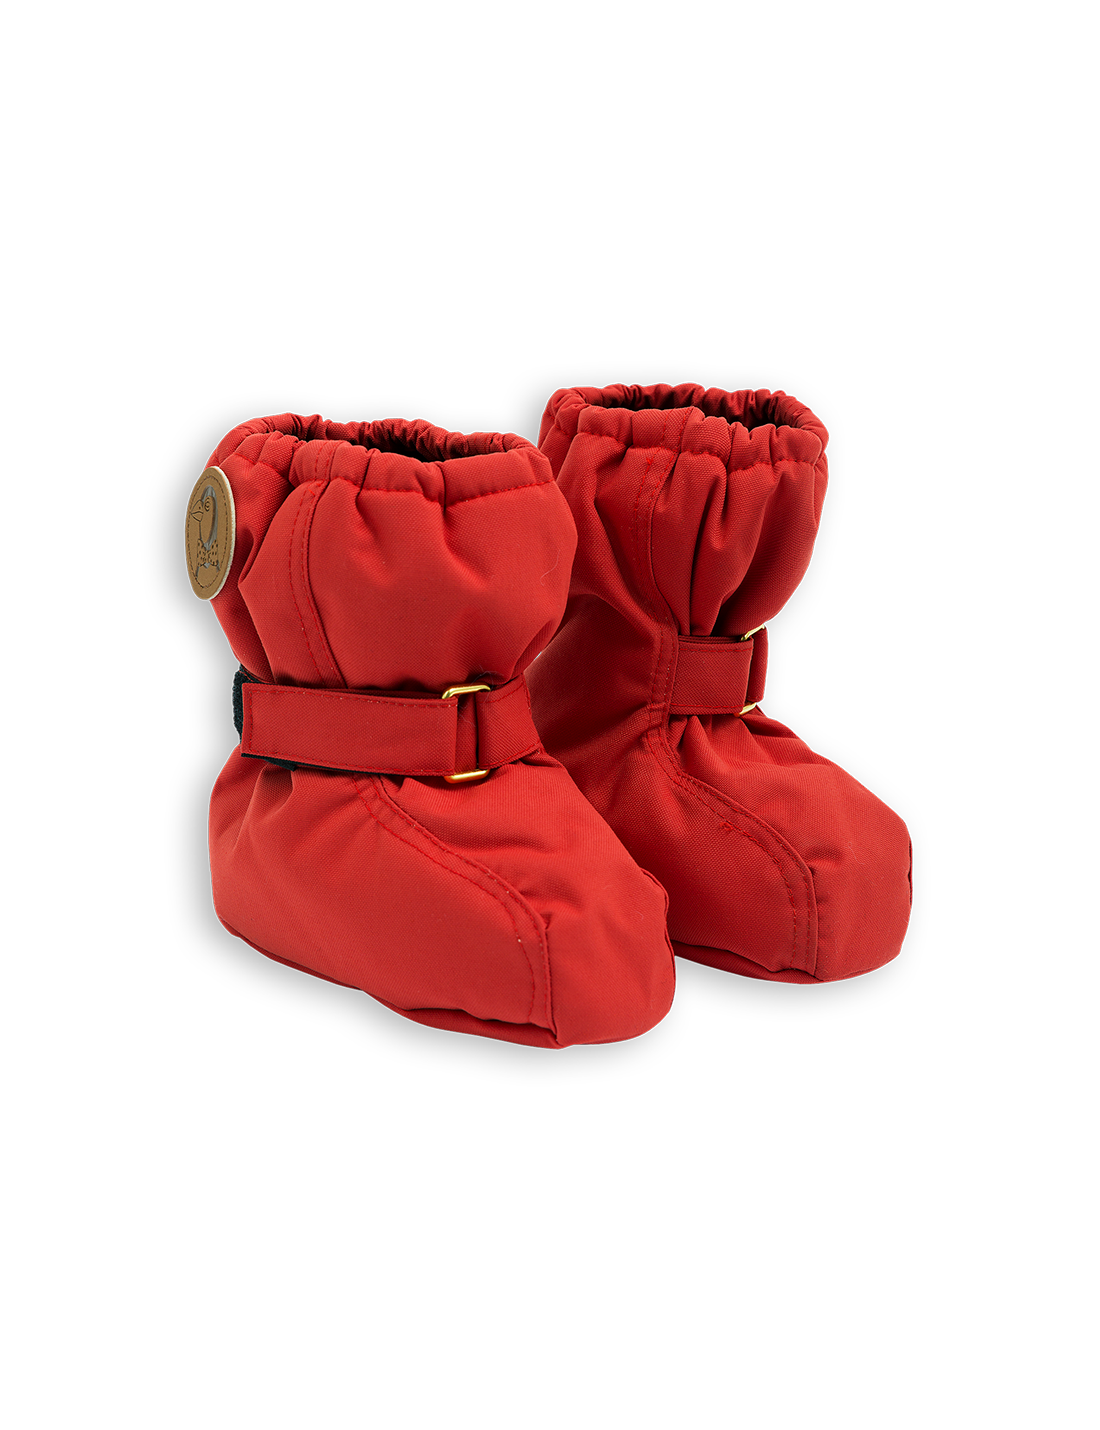 Baby Boot Png - Alaska Baby Boots, Transparent background PNG HD thumbnail